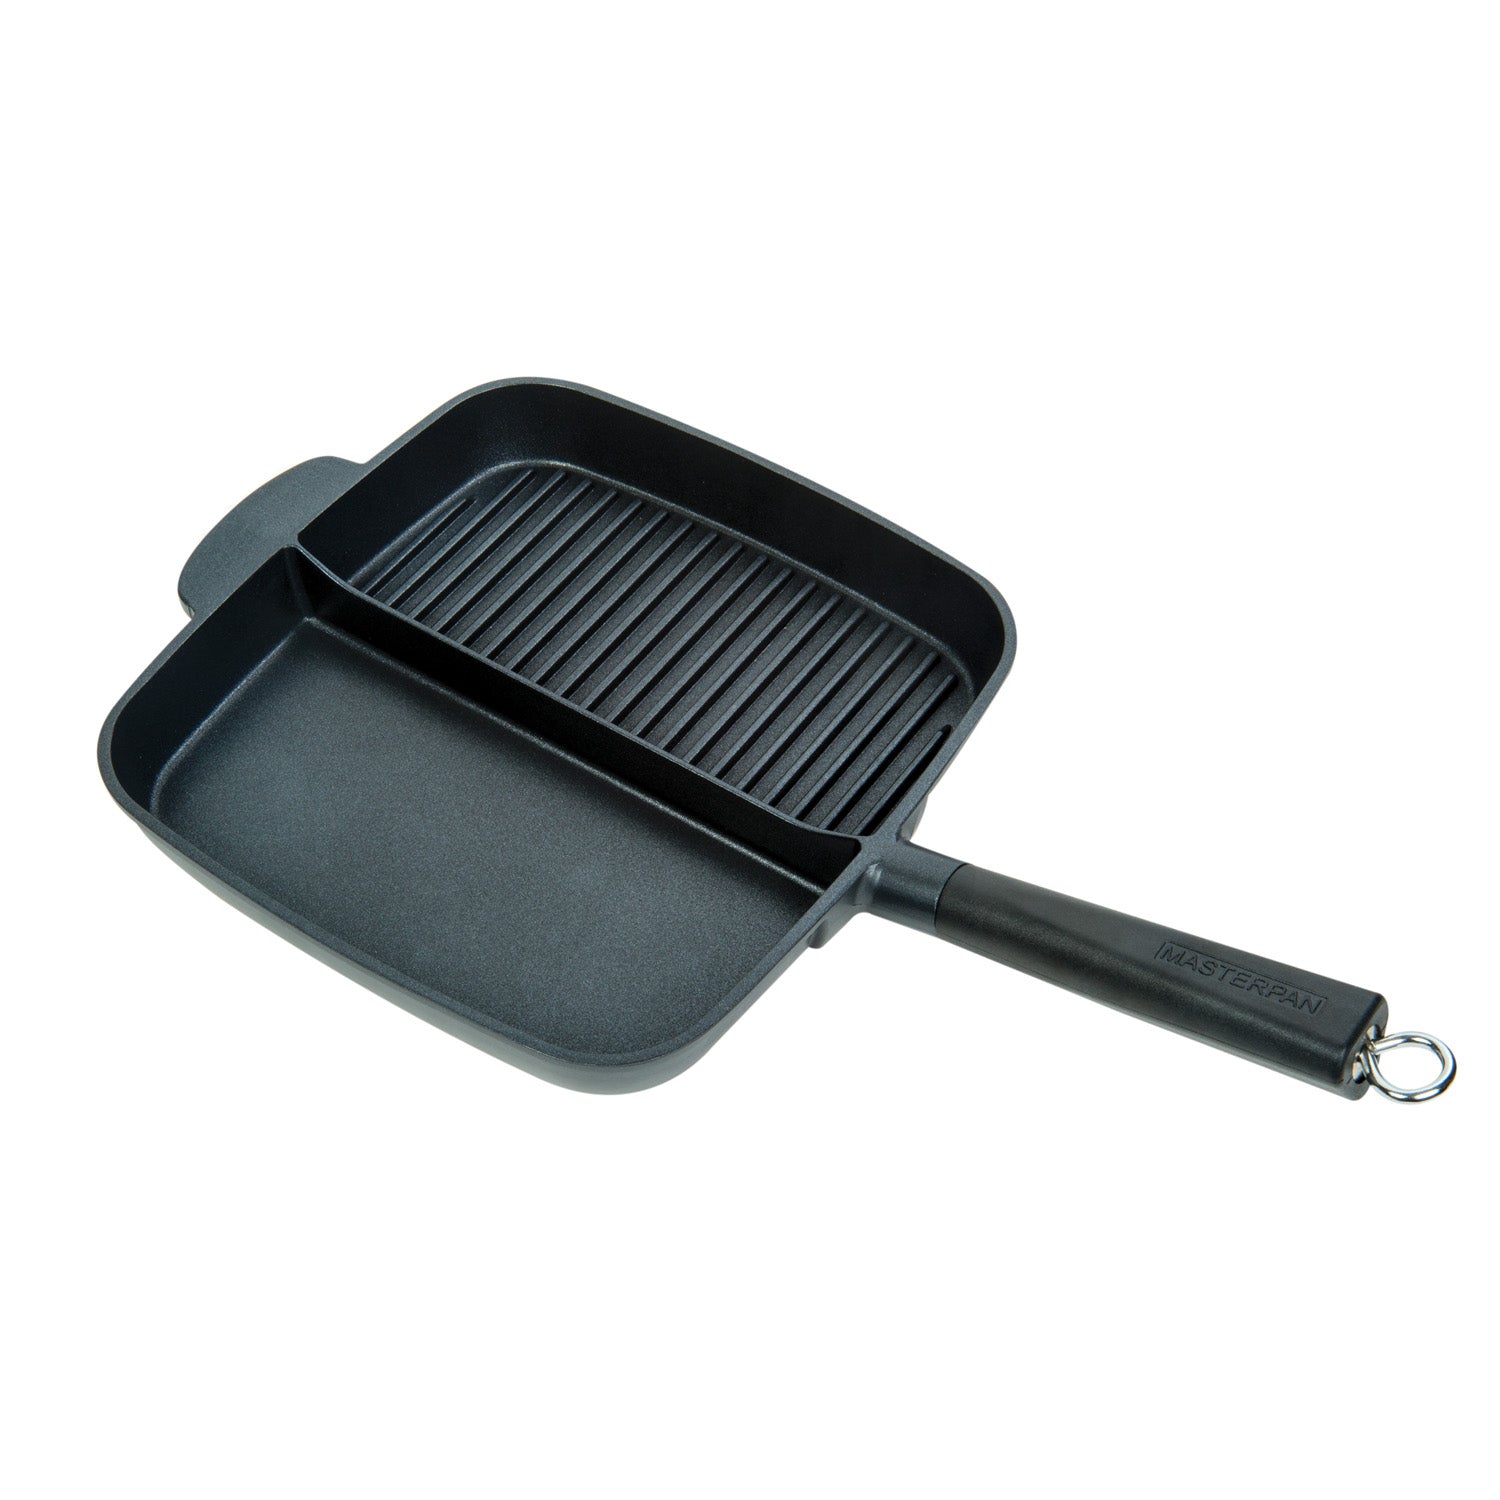 Non-Stick Cast Aluminum Grill & Griddle is an easy-to-clean skillet providing a superior Xylan Plus double layer non-stick coating by Whitford—safe. luminum 2-section skillet has a thick base ideally designed to balance heat flow evenly, and features a removable ergonomic bakelite handle for safe maneuvering